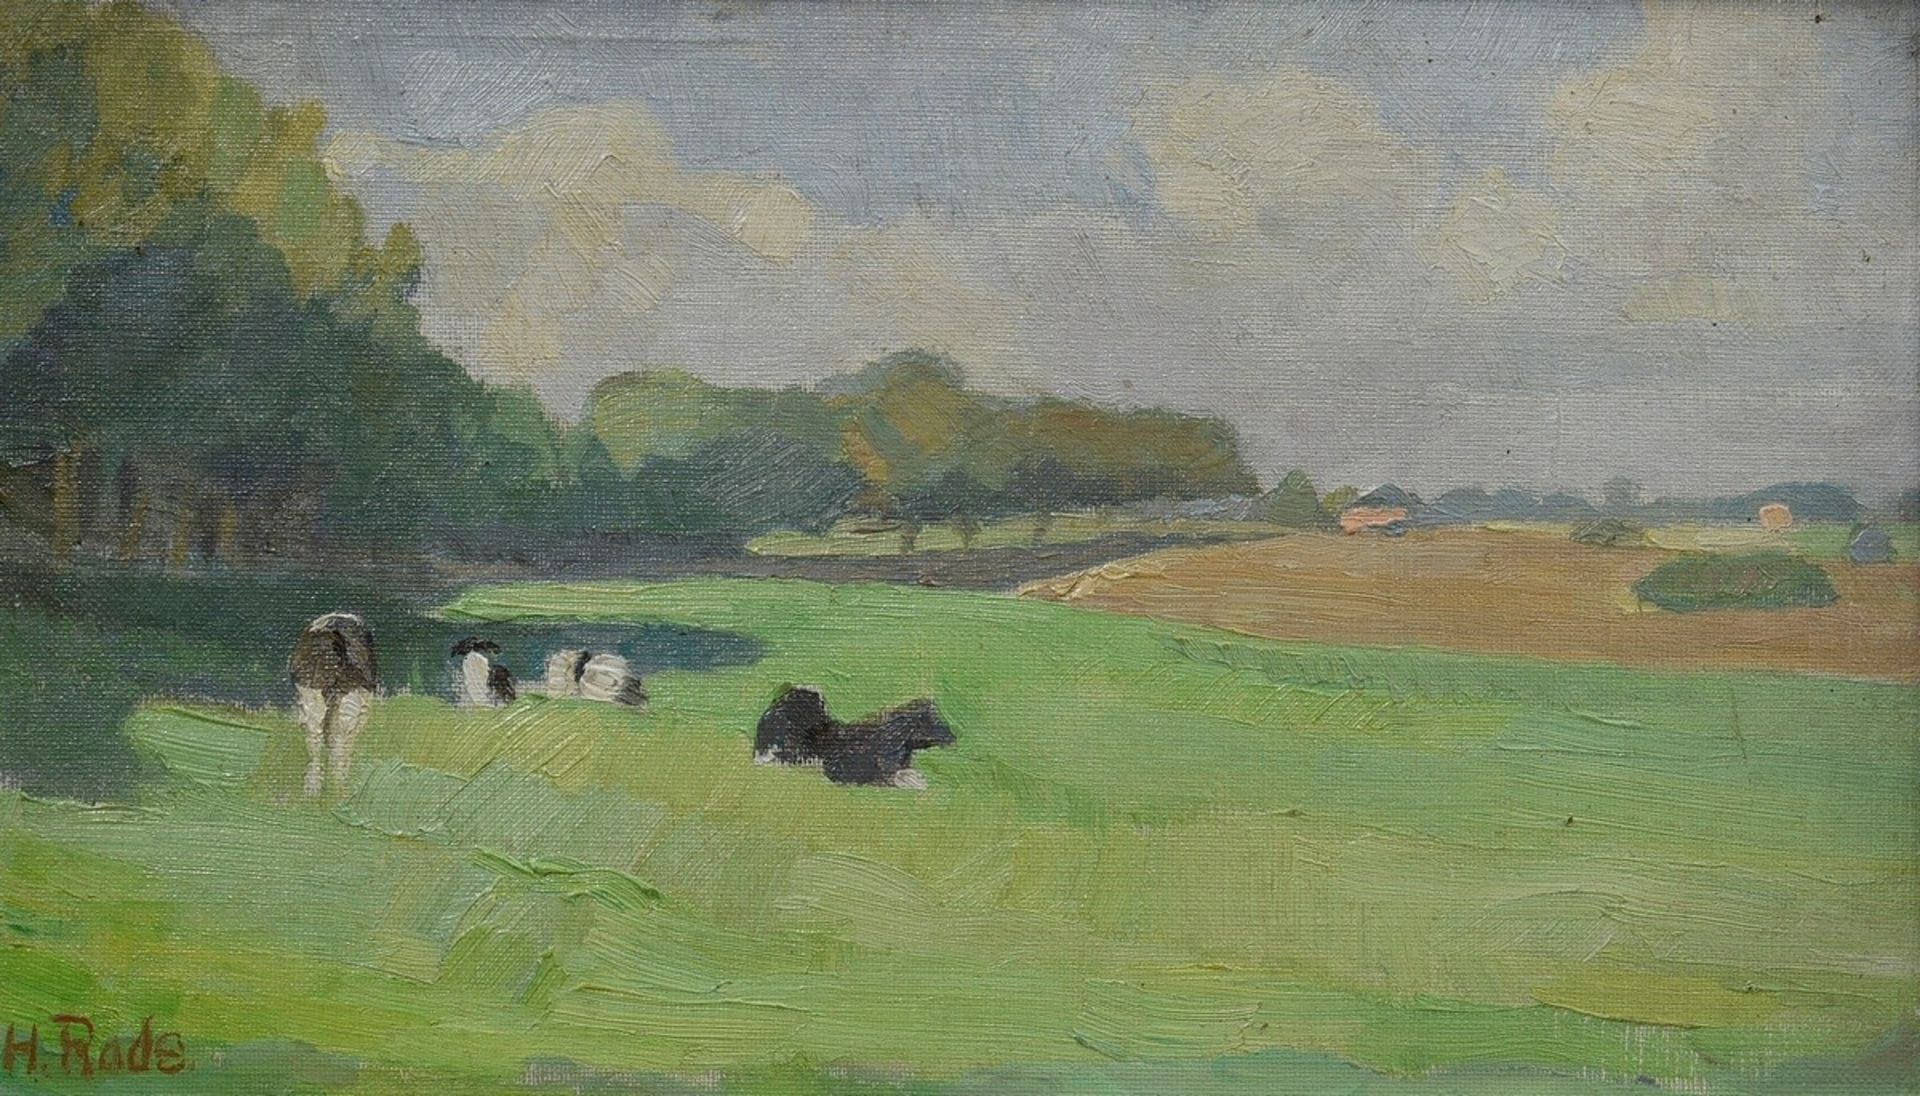 Rode, Heinrich (1906-1983) "Cows in the pasture", oil/canvas mounted on panel, sign. b.l., inscr. o